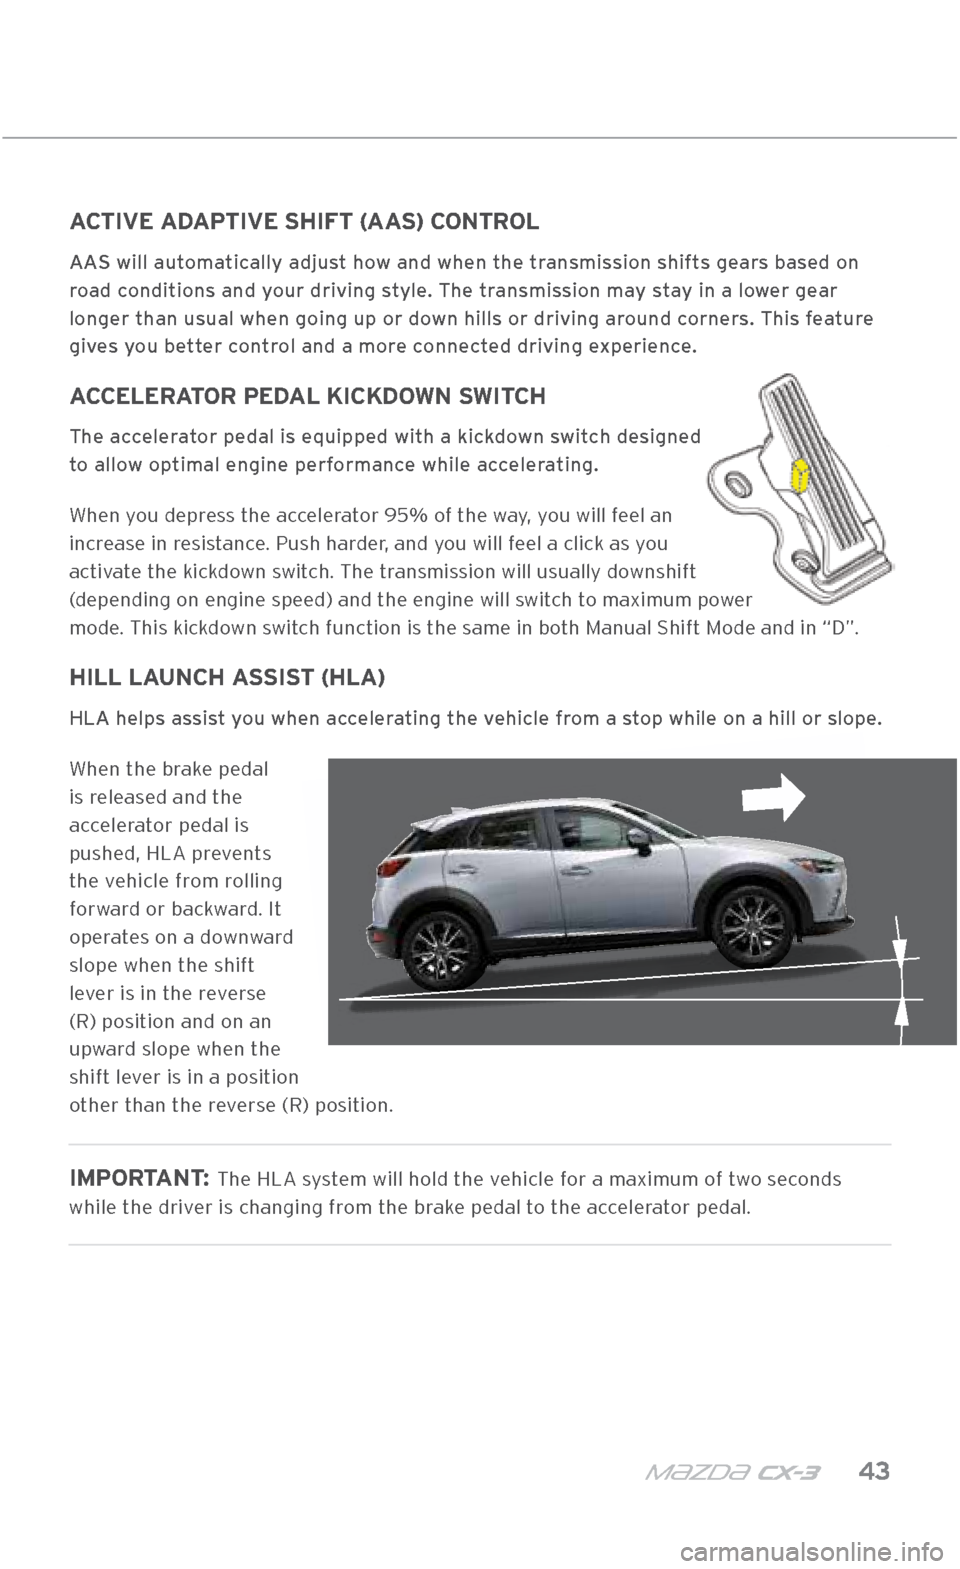 MAZDA MODEL CX-3 2018  Smart Start Guide (in English) m{zd{ c x-3    43
TRAN\fMI\f\fION
ACTIVE ADAPTIVE SHIFT (AAS) CONTROL
AAS will automatically adjust how and when the transmission shifts gears based on 
road conditions and your driving style. The tra